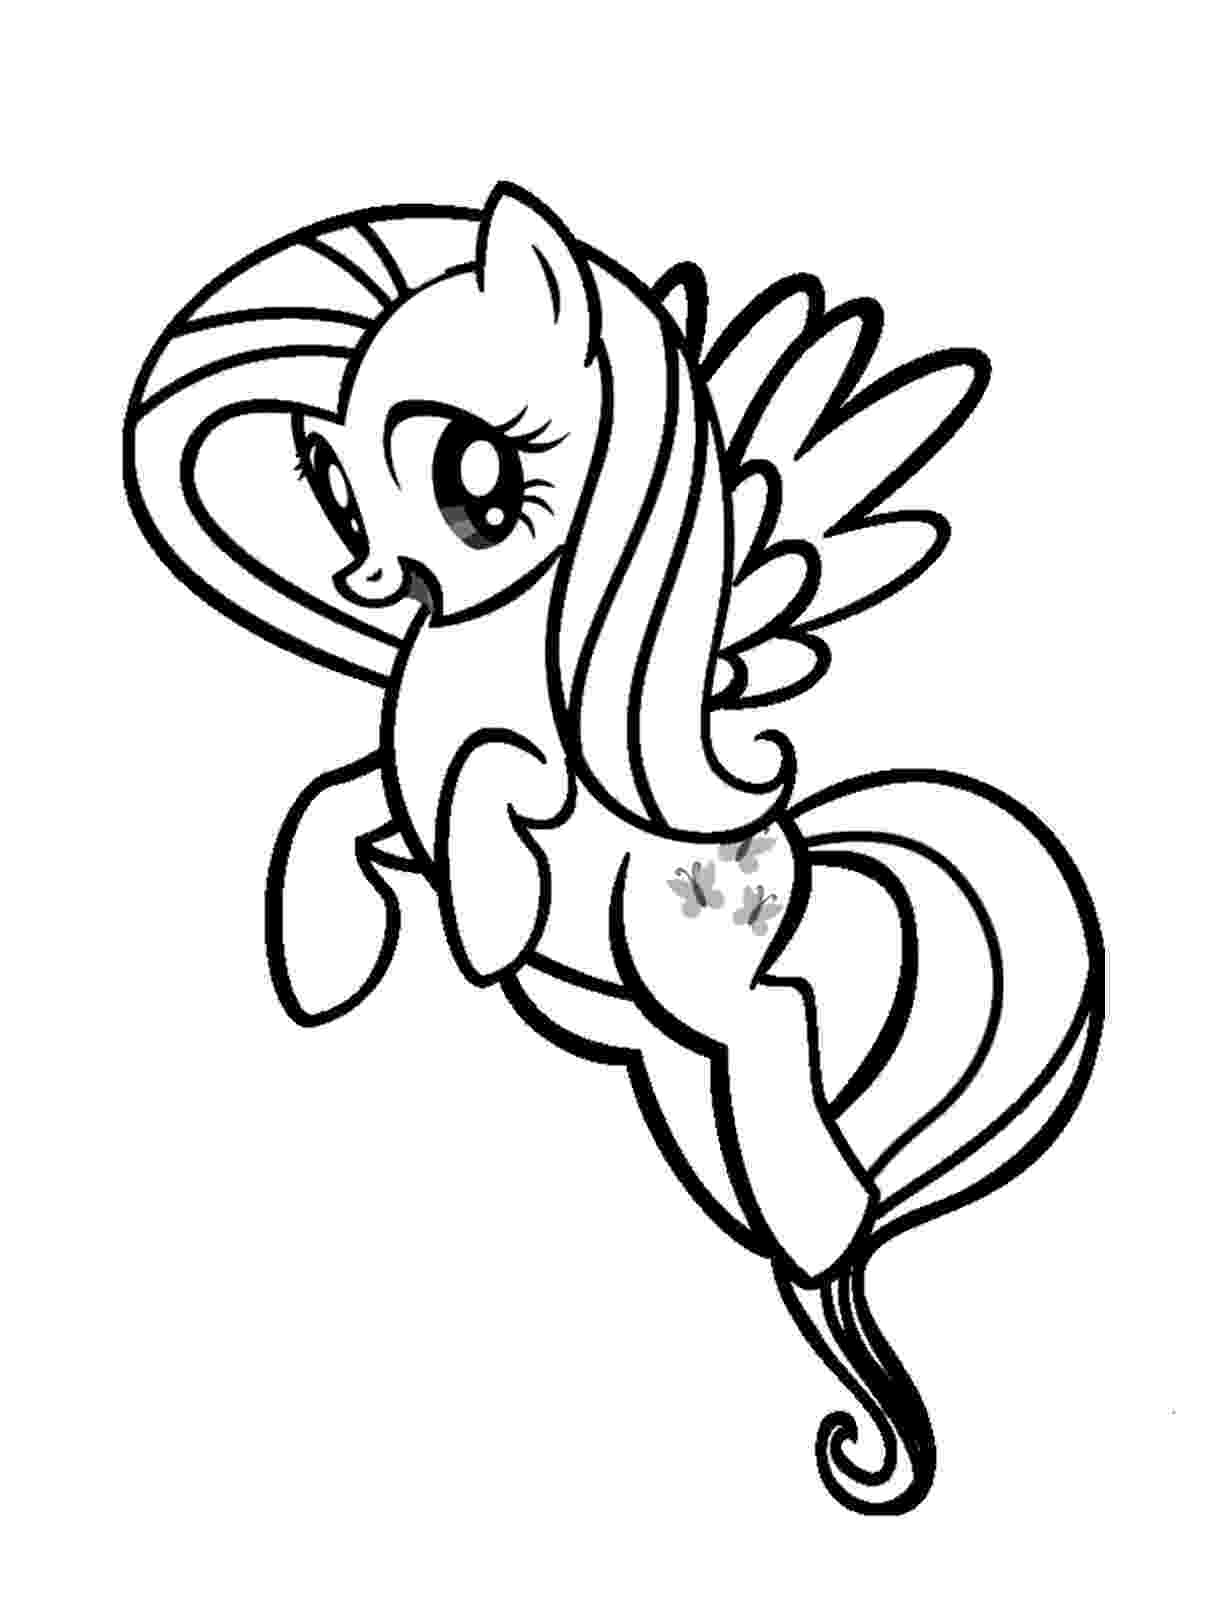 fluttershy coloring fluttershy coloring pages best coloring pages for kids fluttershy coloring 1 1